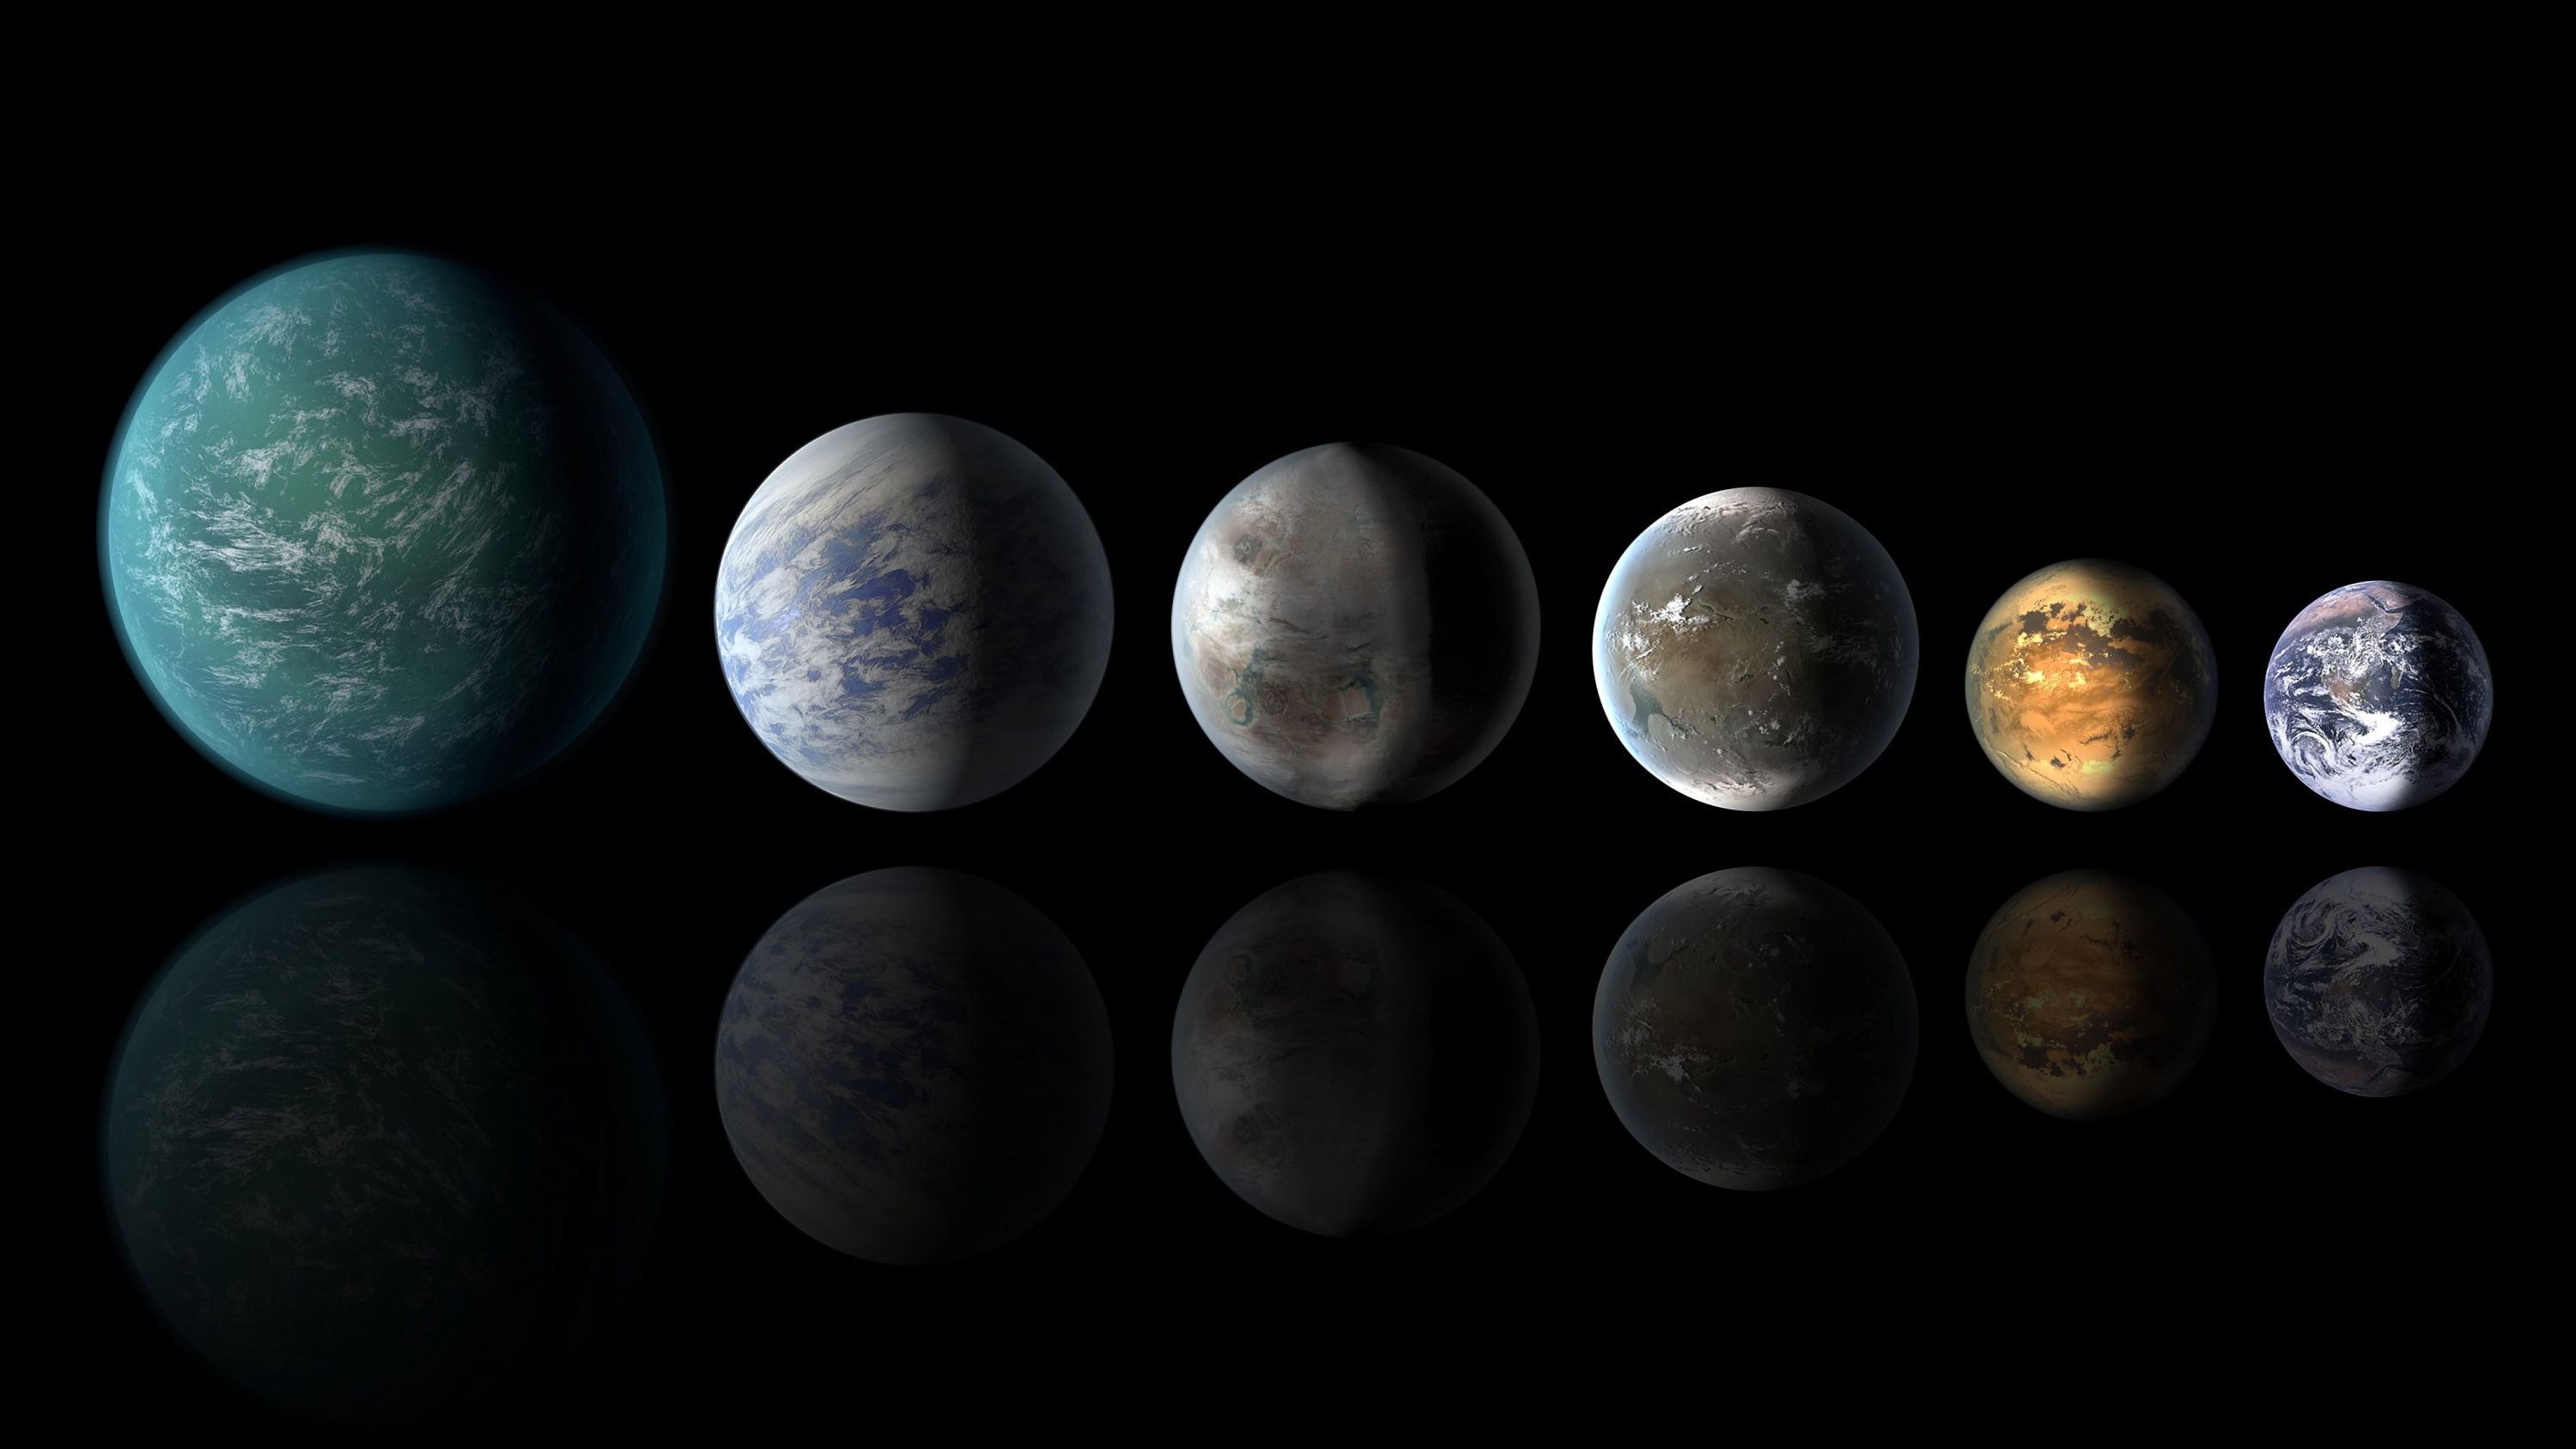 Georgia Tech's broad array of Earth chemistry, astrophysics, and evolution research, bolstered by related engineering fields, could offer insight into the possibility of complex life on exoplanets. Much of our research in these areas is funded in part by NASA Astrobiology Institute. Photo: NASA/Ames/JPL-Caltech